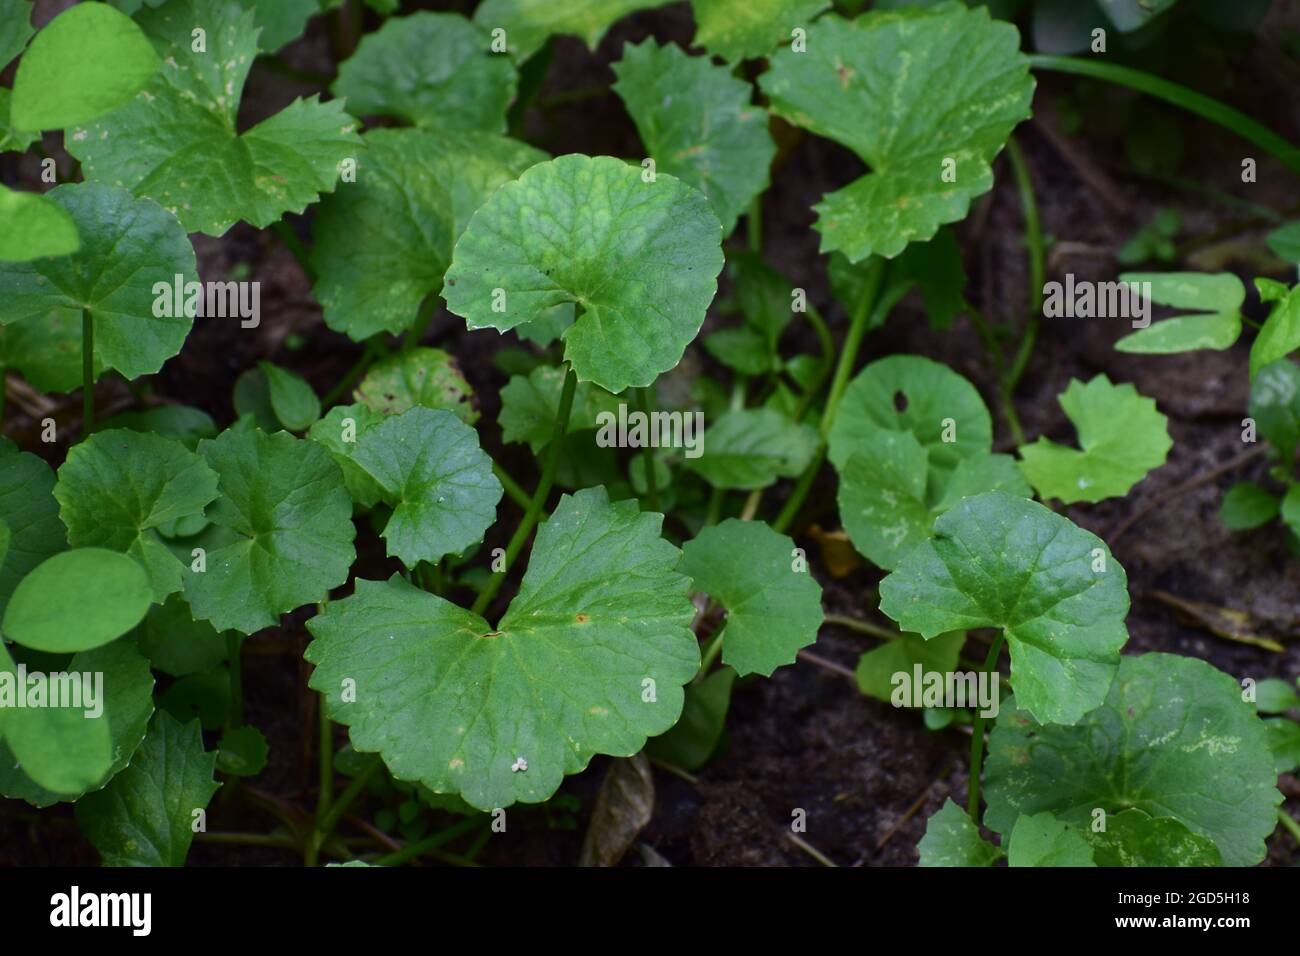 Green Pennywort leaves and plants on the agriculture land, Centella asiatica Pennywort cultivation on wet farm land Stock Photo